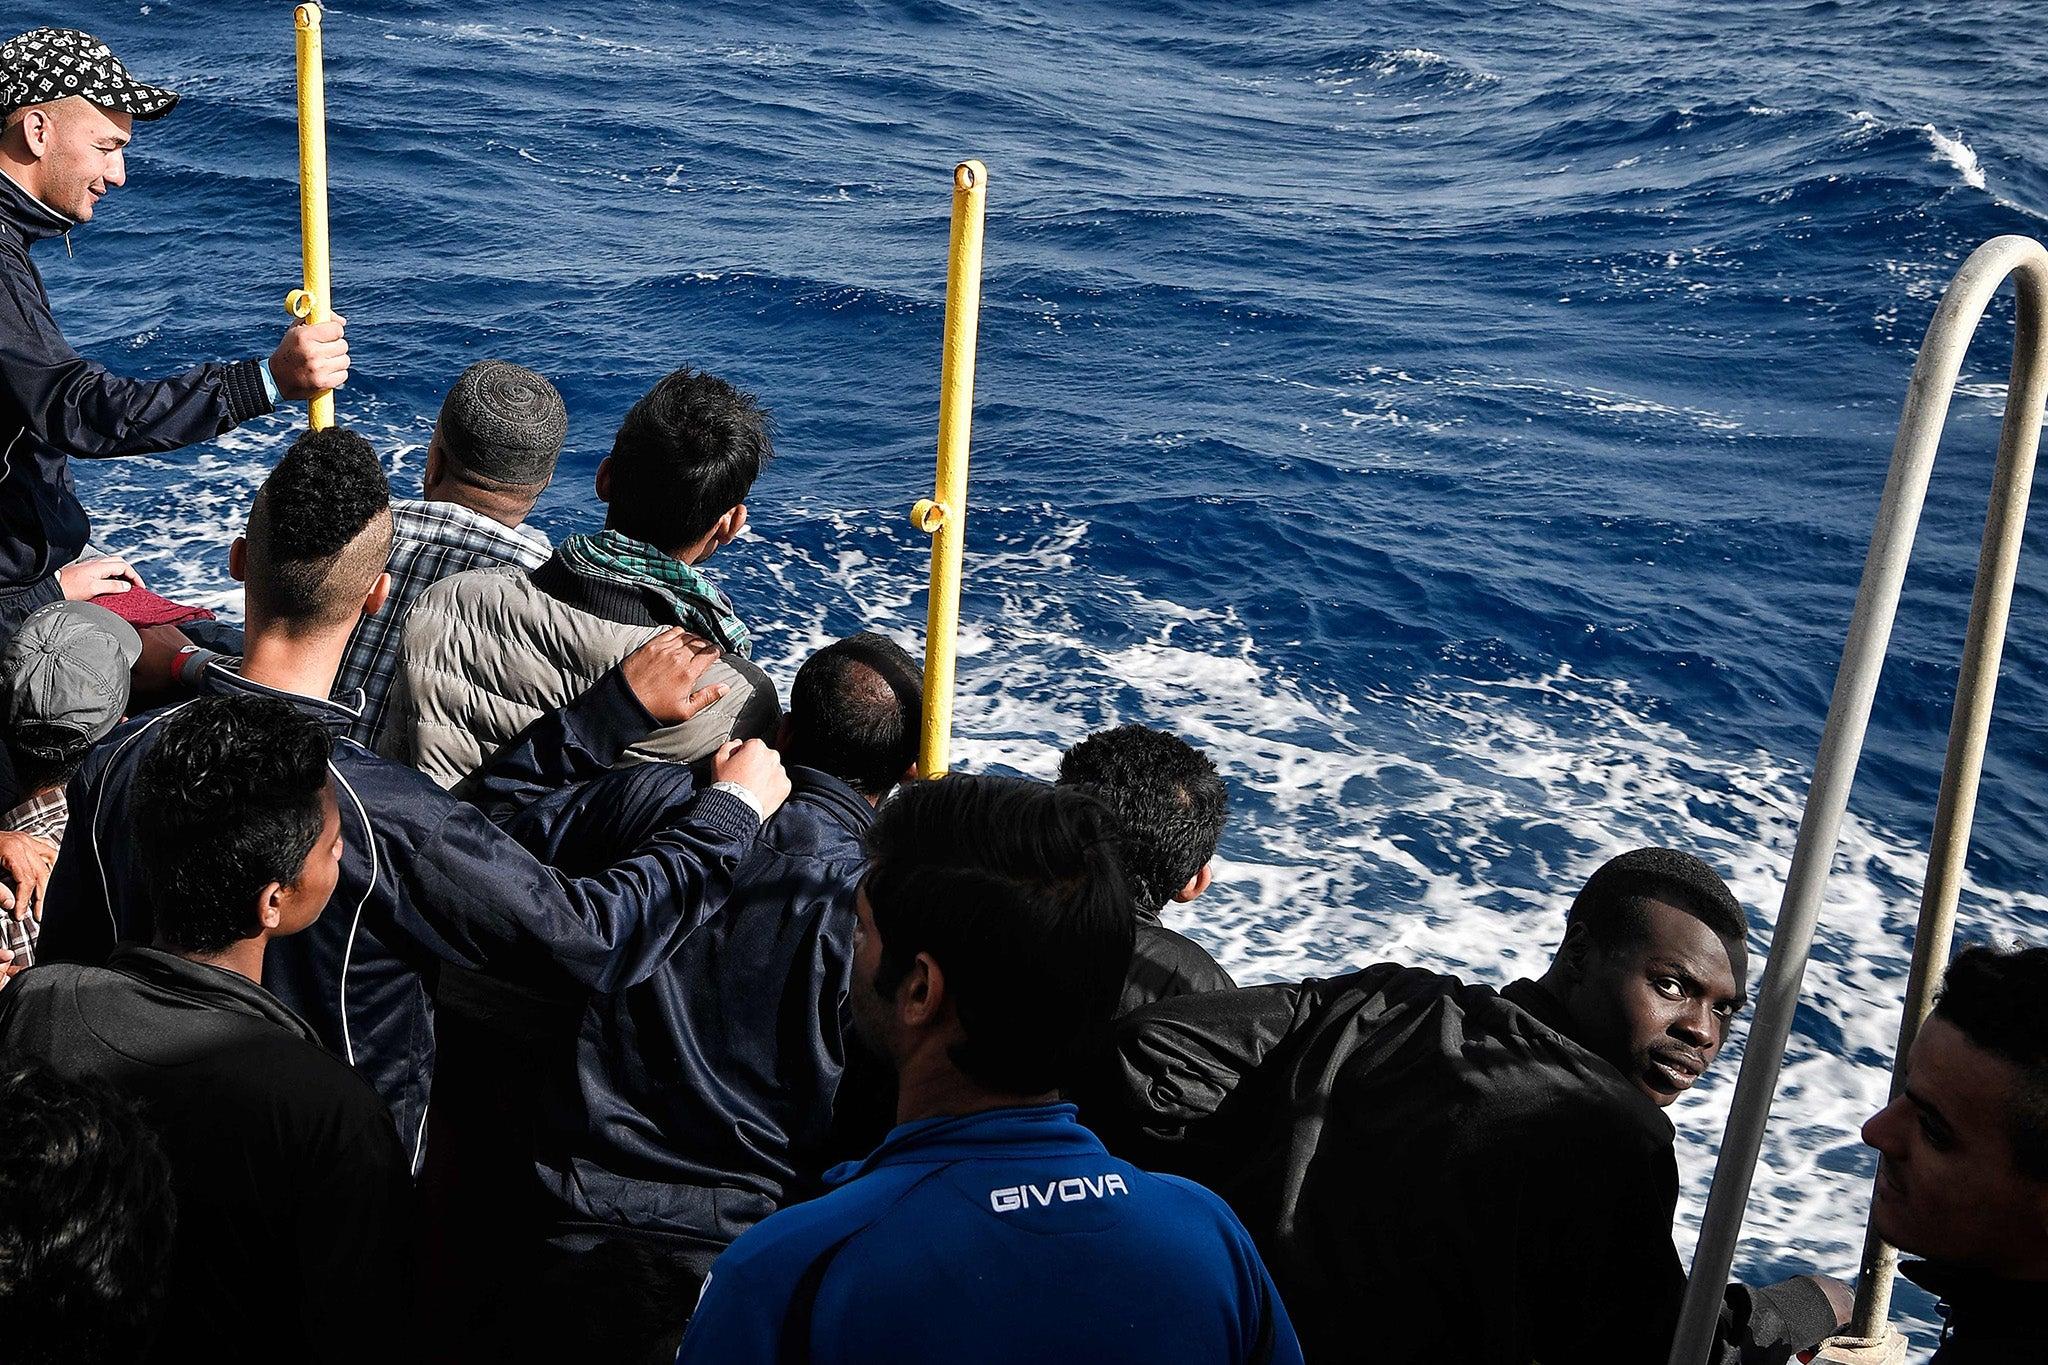 Migrants aboard the rescue vessel MV Aquarius off the coast of Libya in 2018, where they were stranded for two days while Italy and the UK argued over their fate